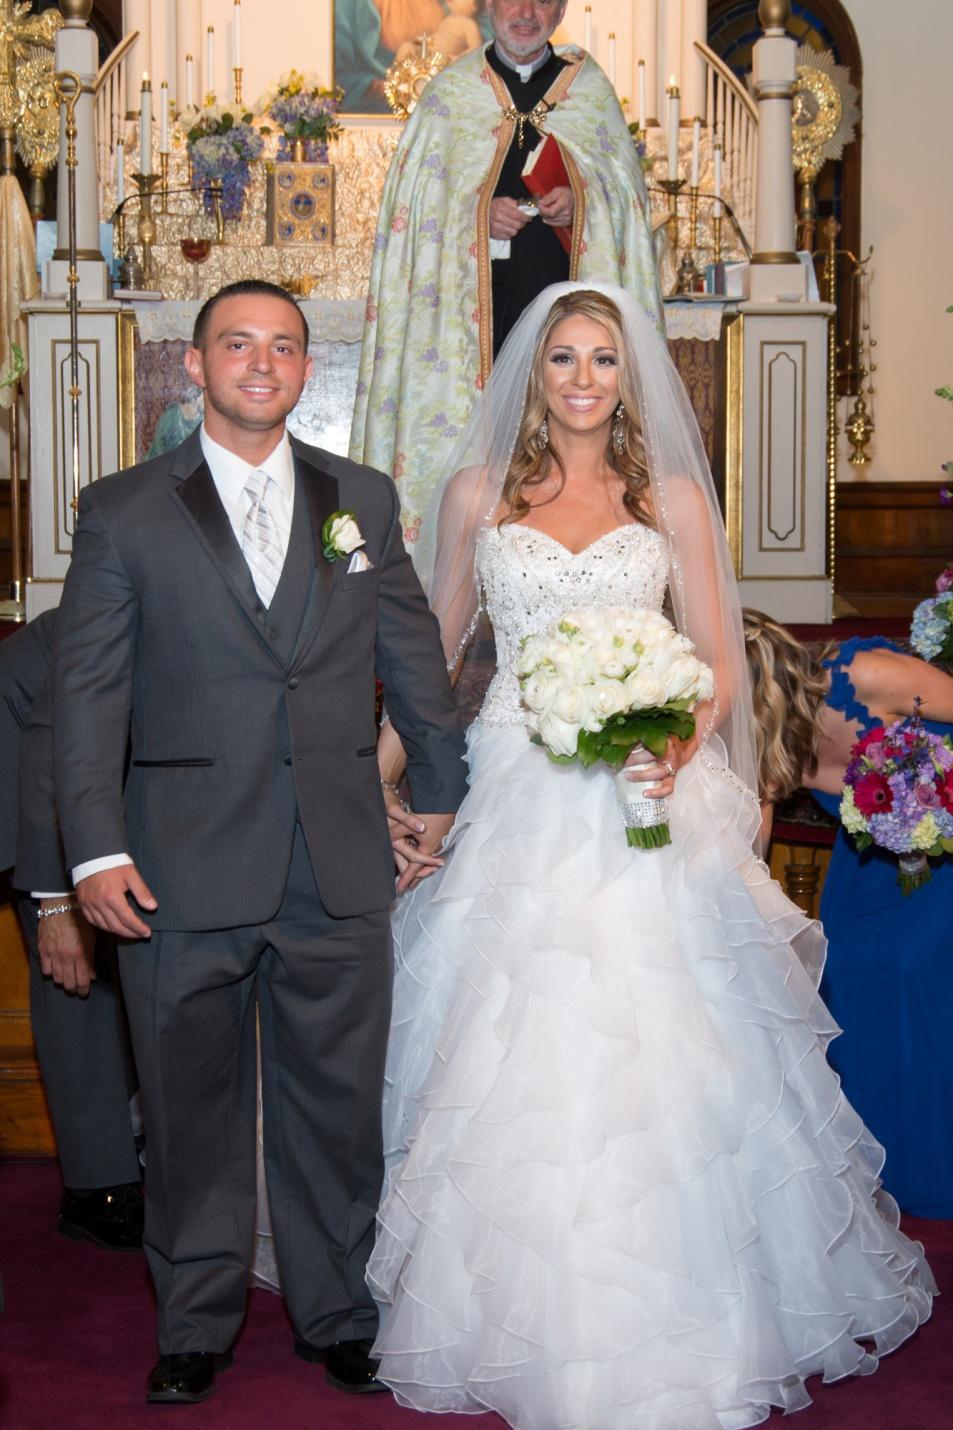 Kenneth Iavarone and Sonya Parseghian exchanged the vows of Holy Matrimony in Sts.